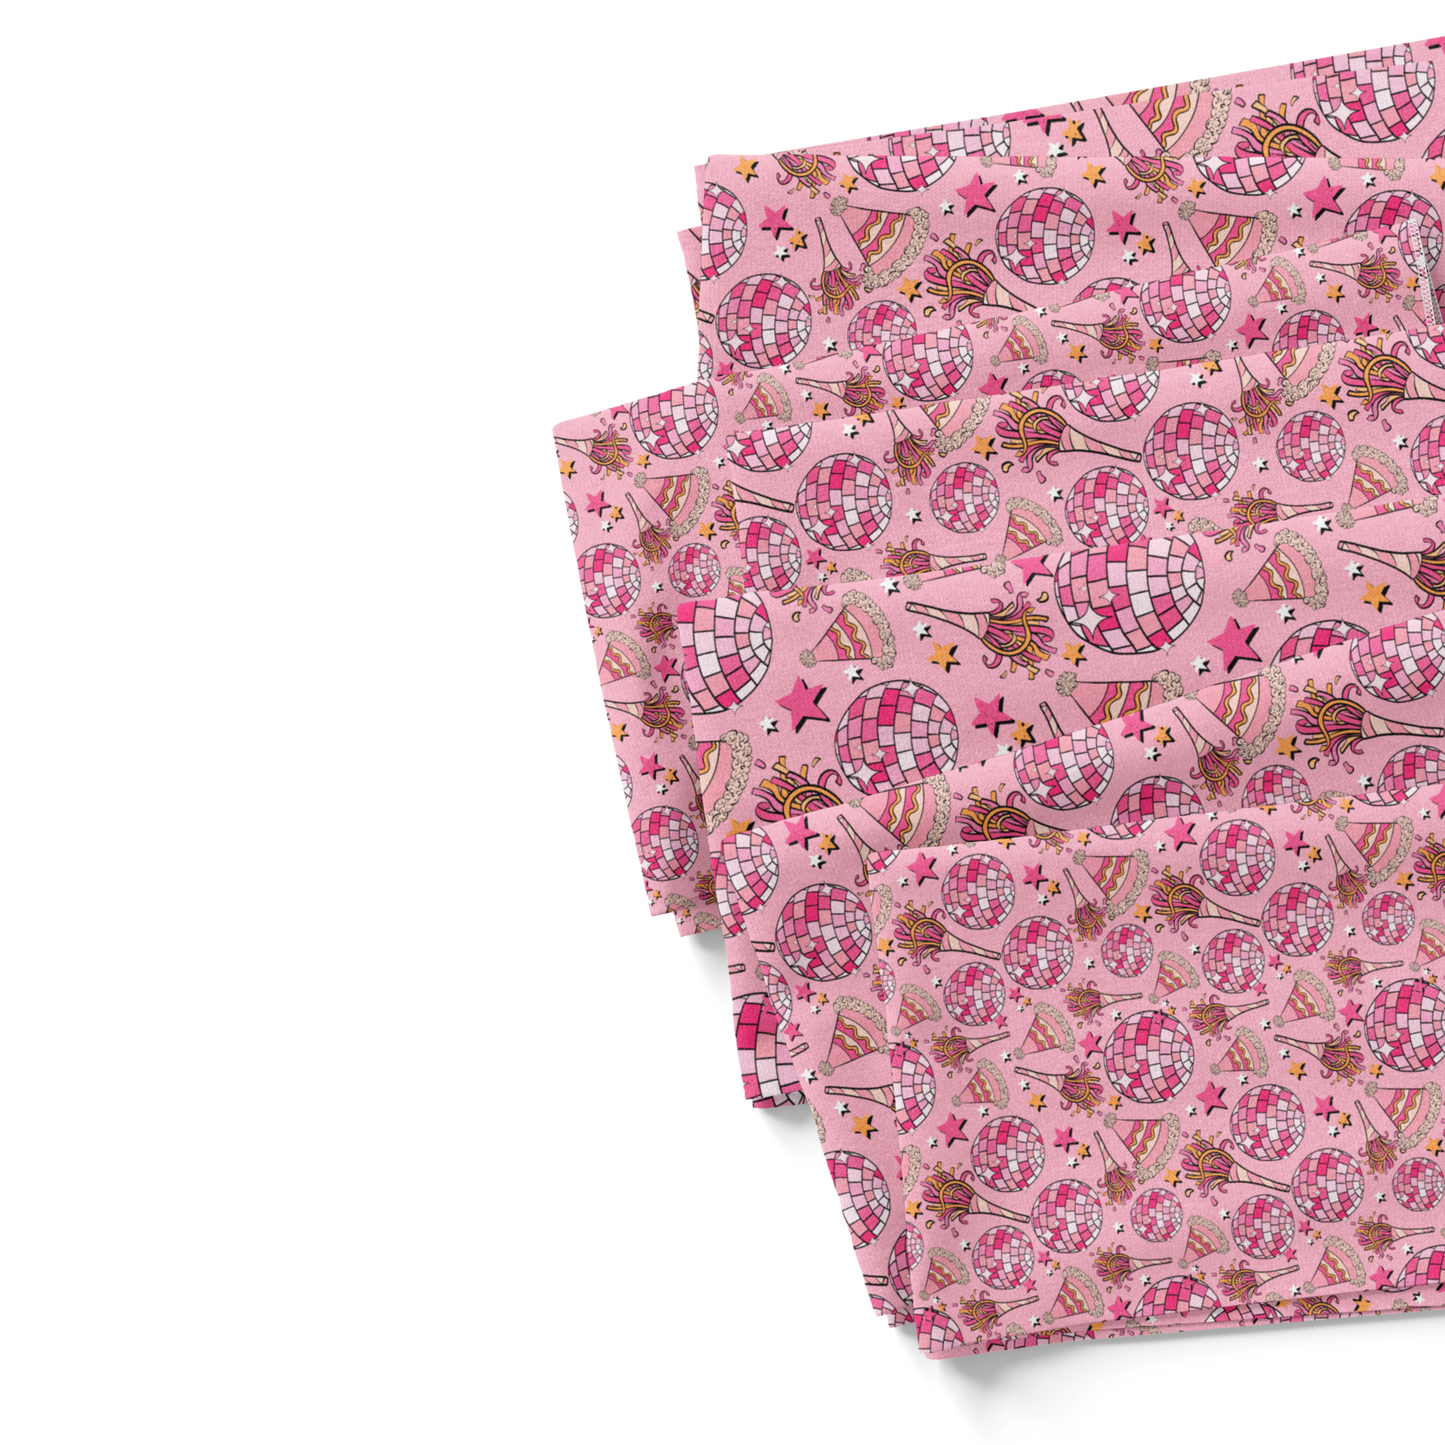 Pink fabric by the yard swatches with disco balls, party hats, stars, and confetti.